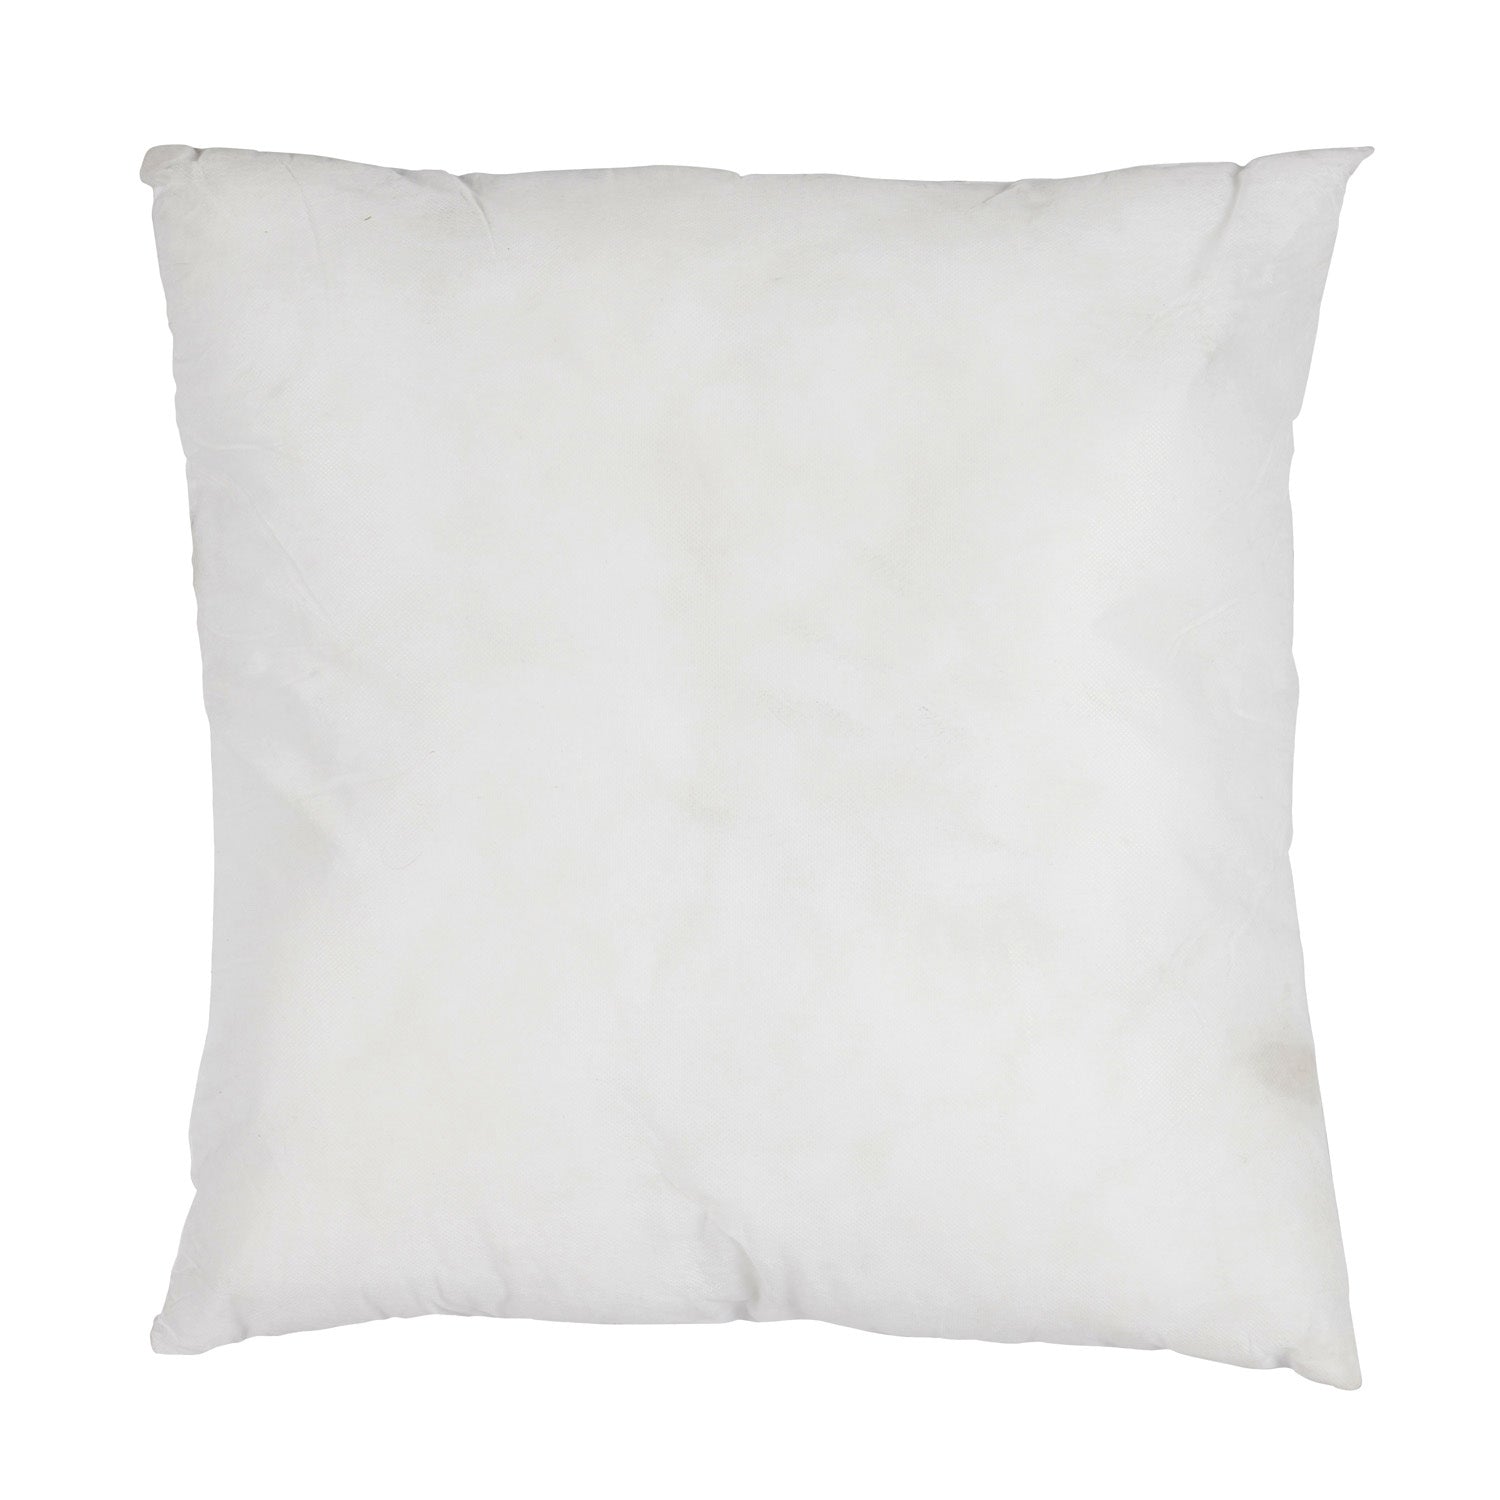 Outdoor Pillow Form, 18 Inch - Lake Norman Gifts